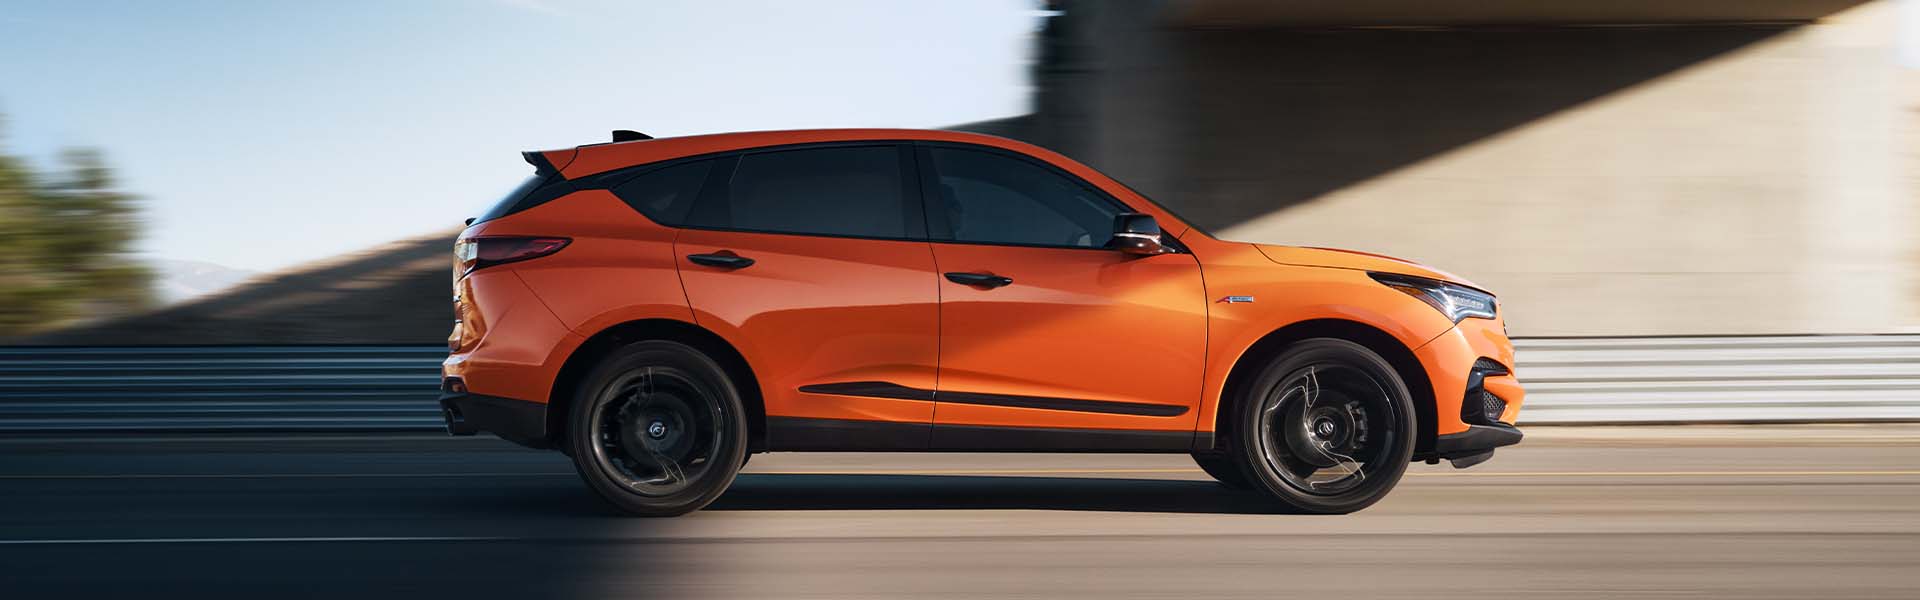 Compare the 2021 Acura RDX vs. the 2022 Audi Q5 at Bobby Rahal Acura | Profile View of Orange 2021 Acura RDX Driving Under Underpass on Highway at Sunset